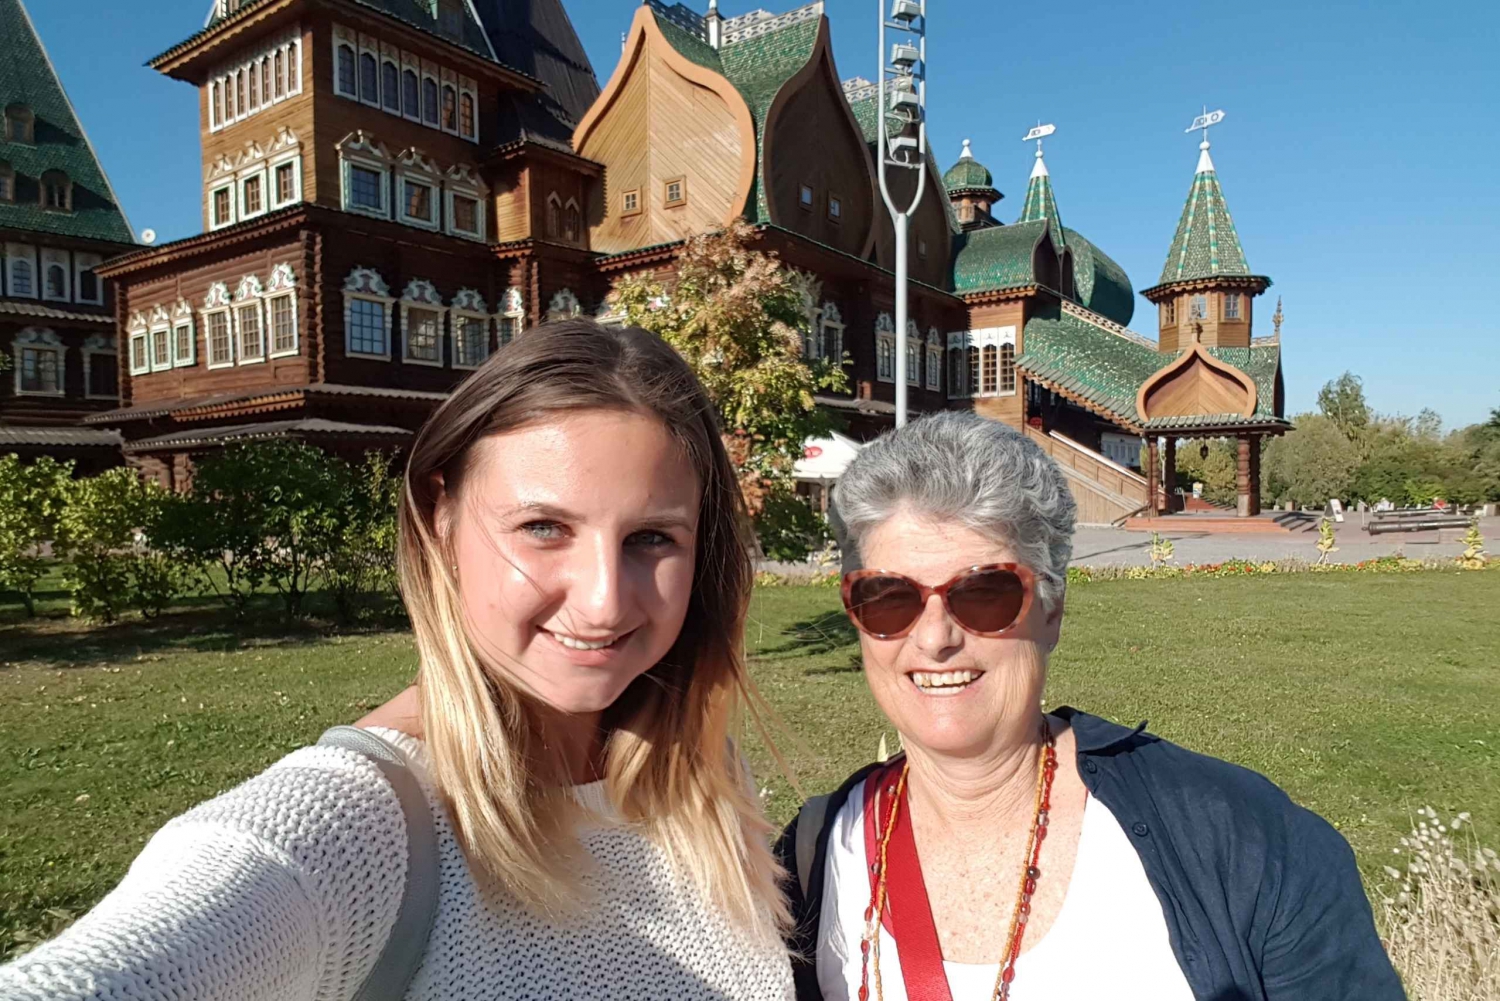 Private Tour of Kolomenskoye Tsar's Estate and Wooden Palace